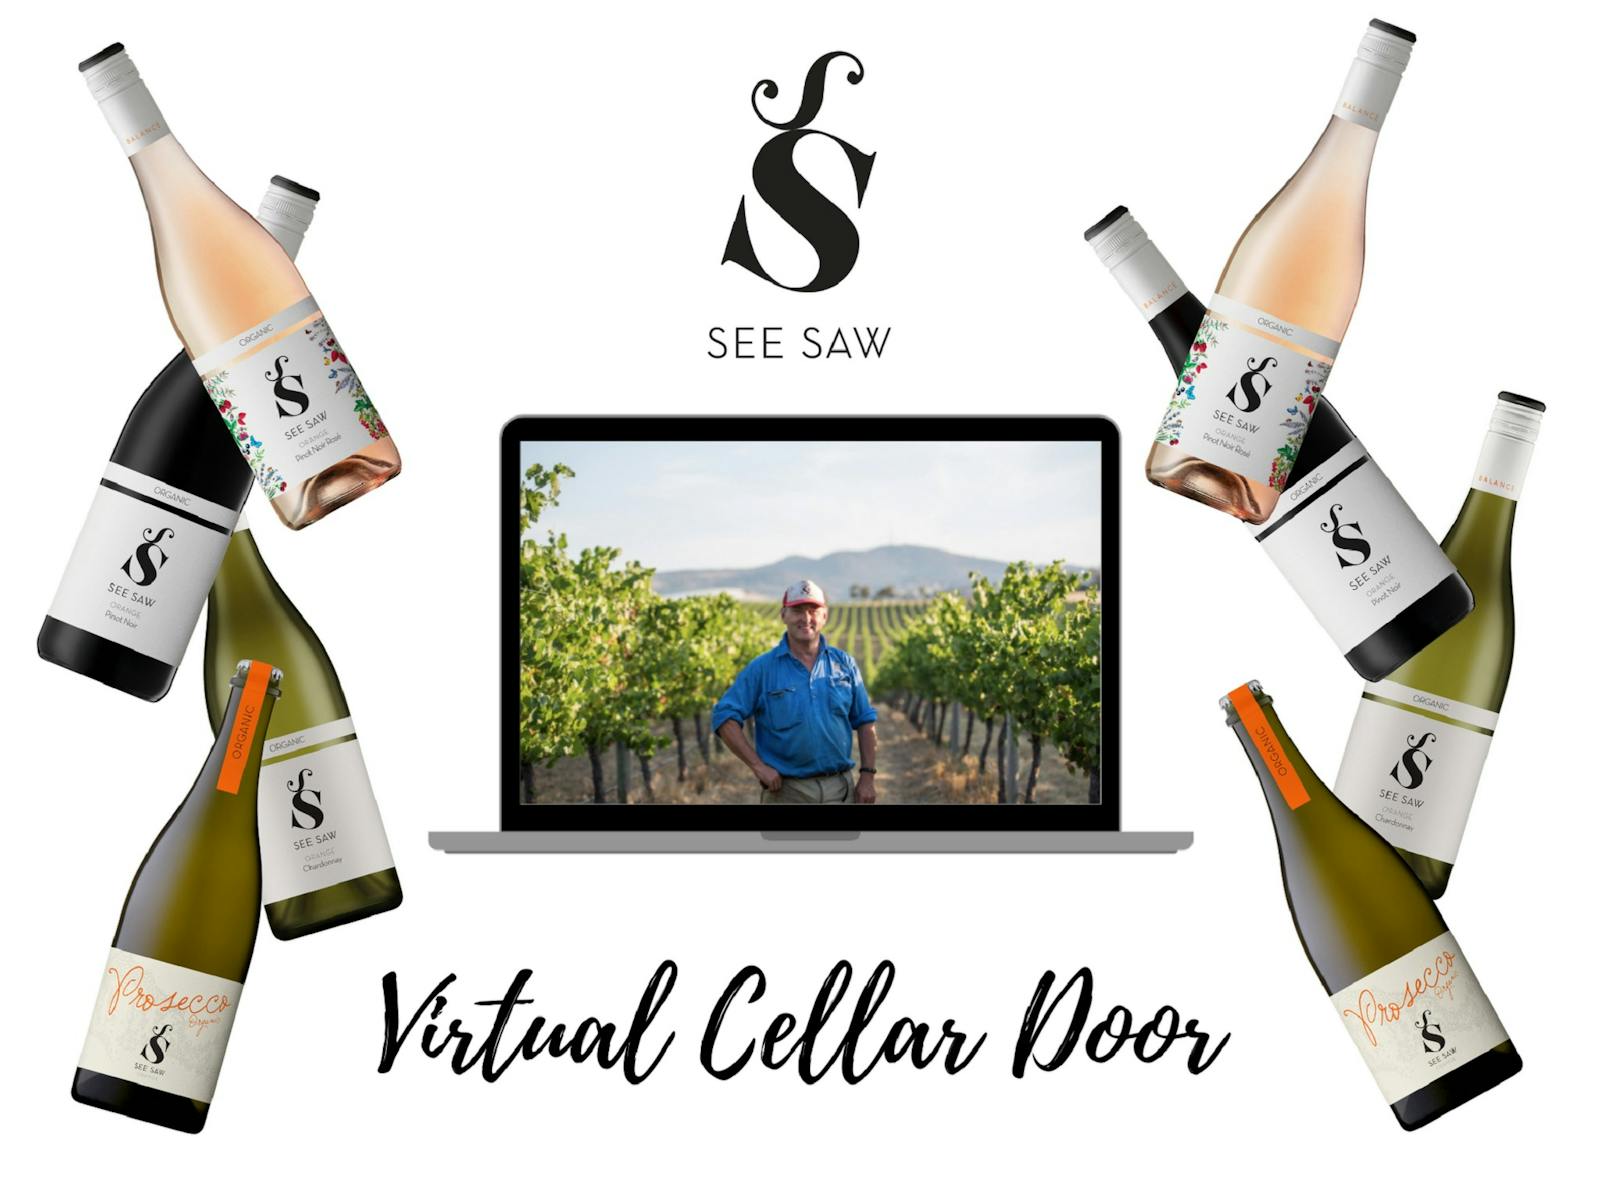 Image for See Saw Wines Virtual Cellar Door